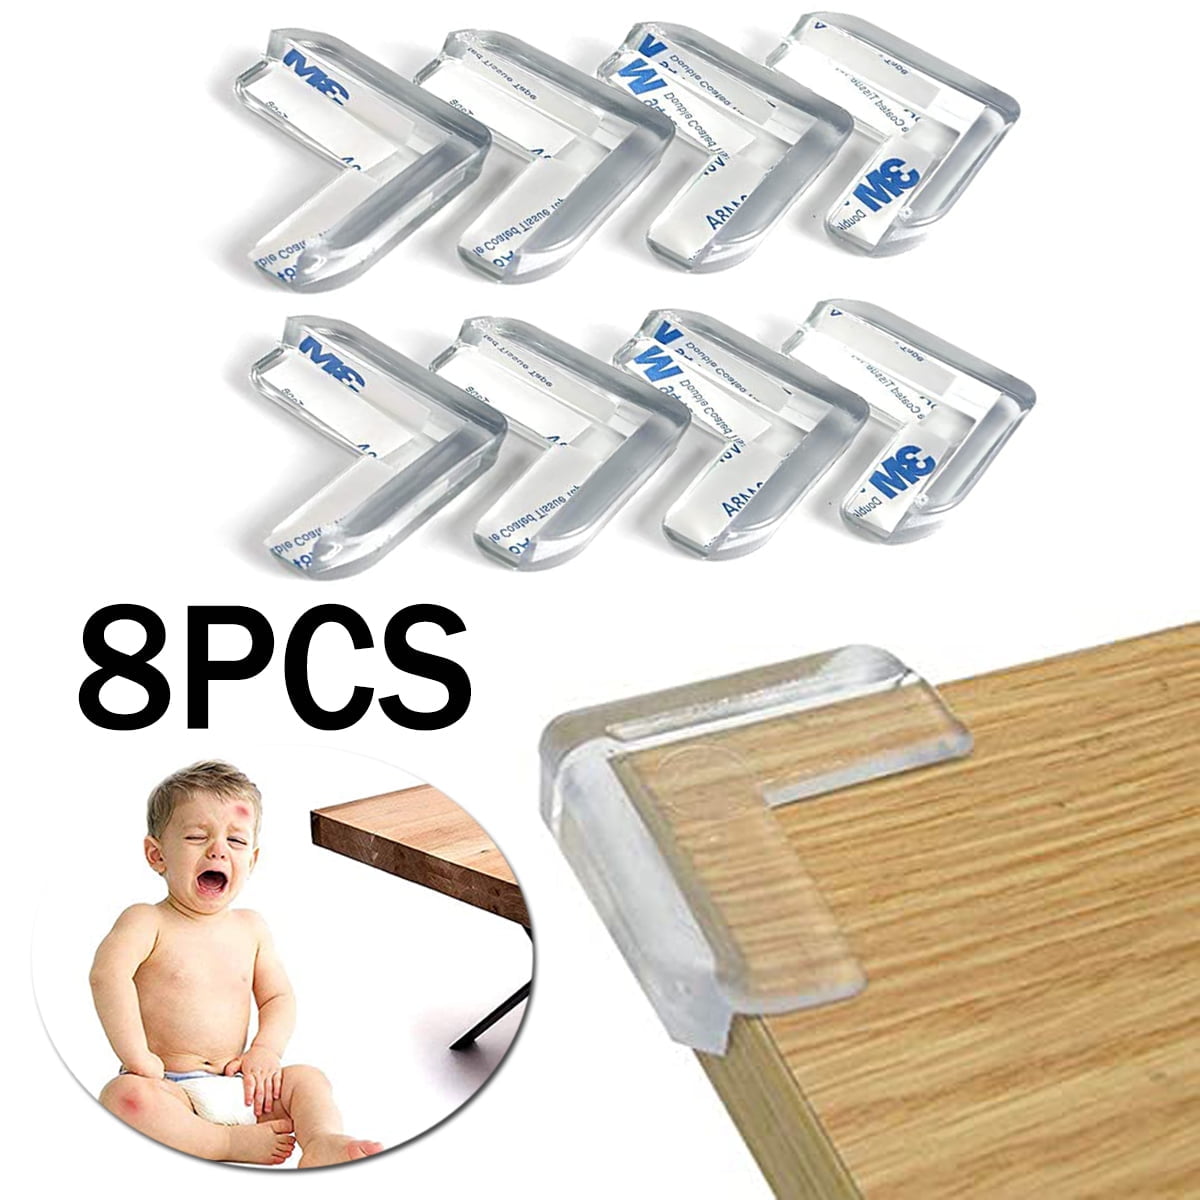 Corner Protector, Baby Proofing Table Corner Guards – Colorful PoPo